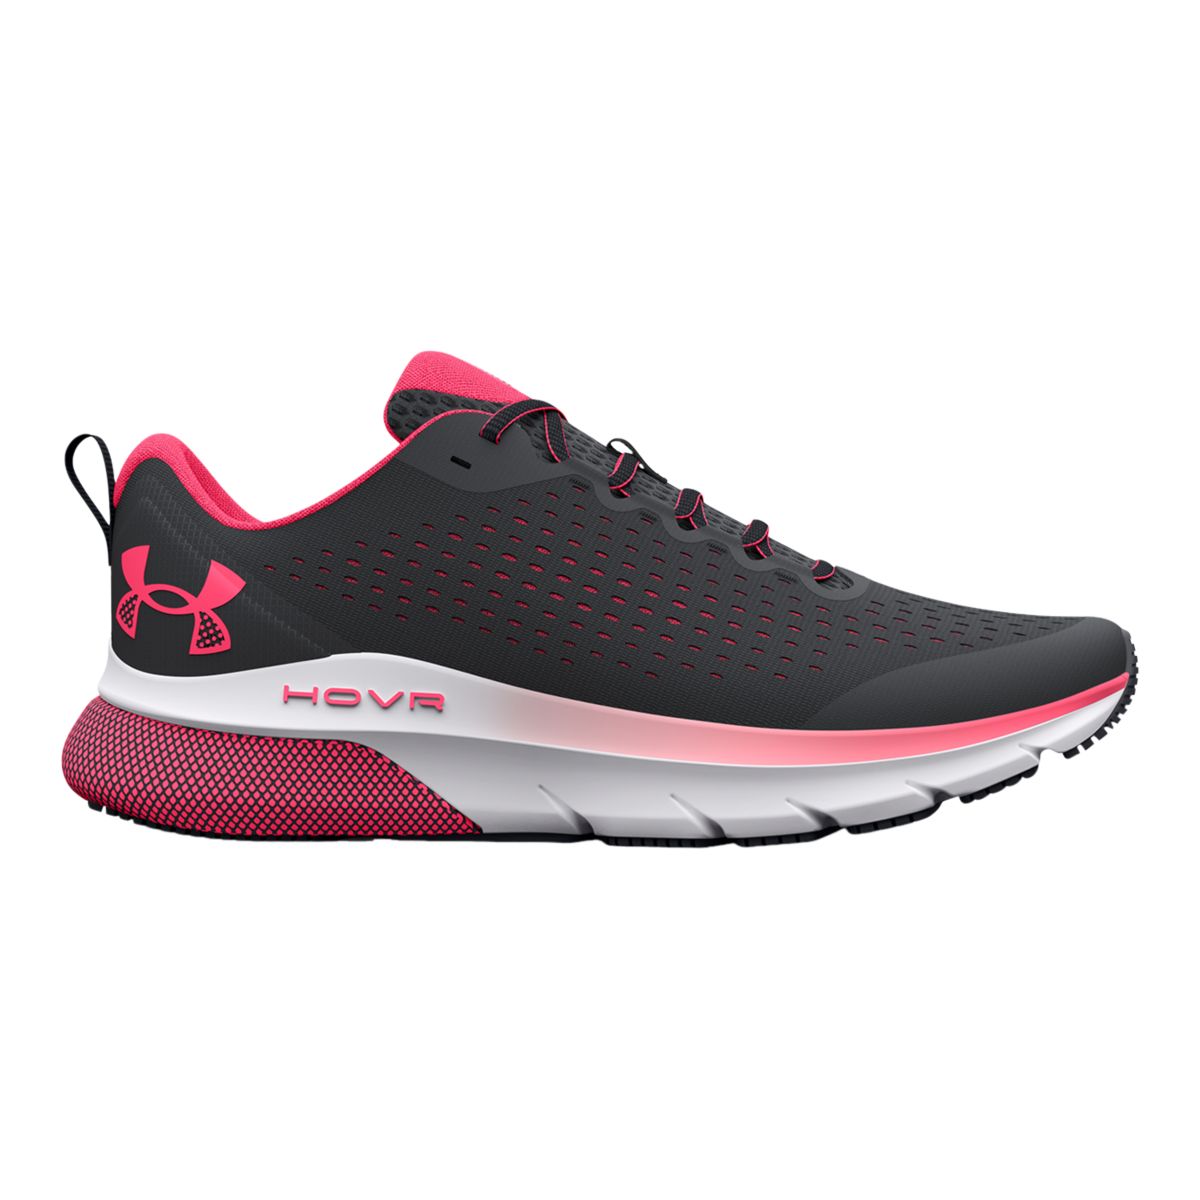 Under Armour Women's HOVR Turbulence Running Shoes